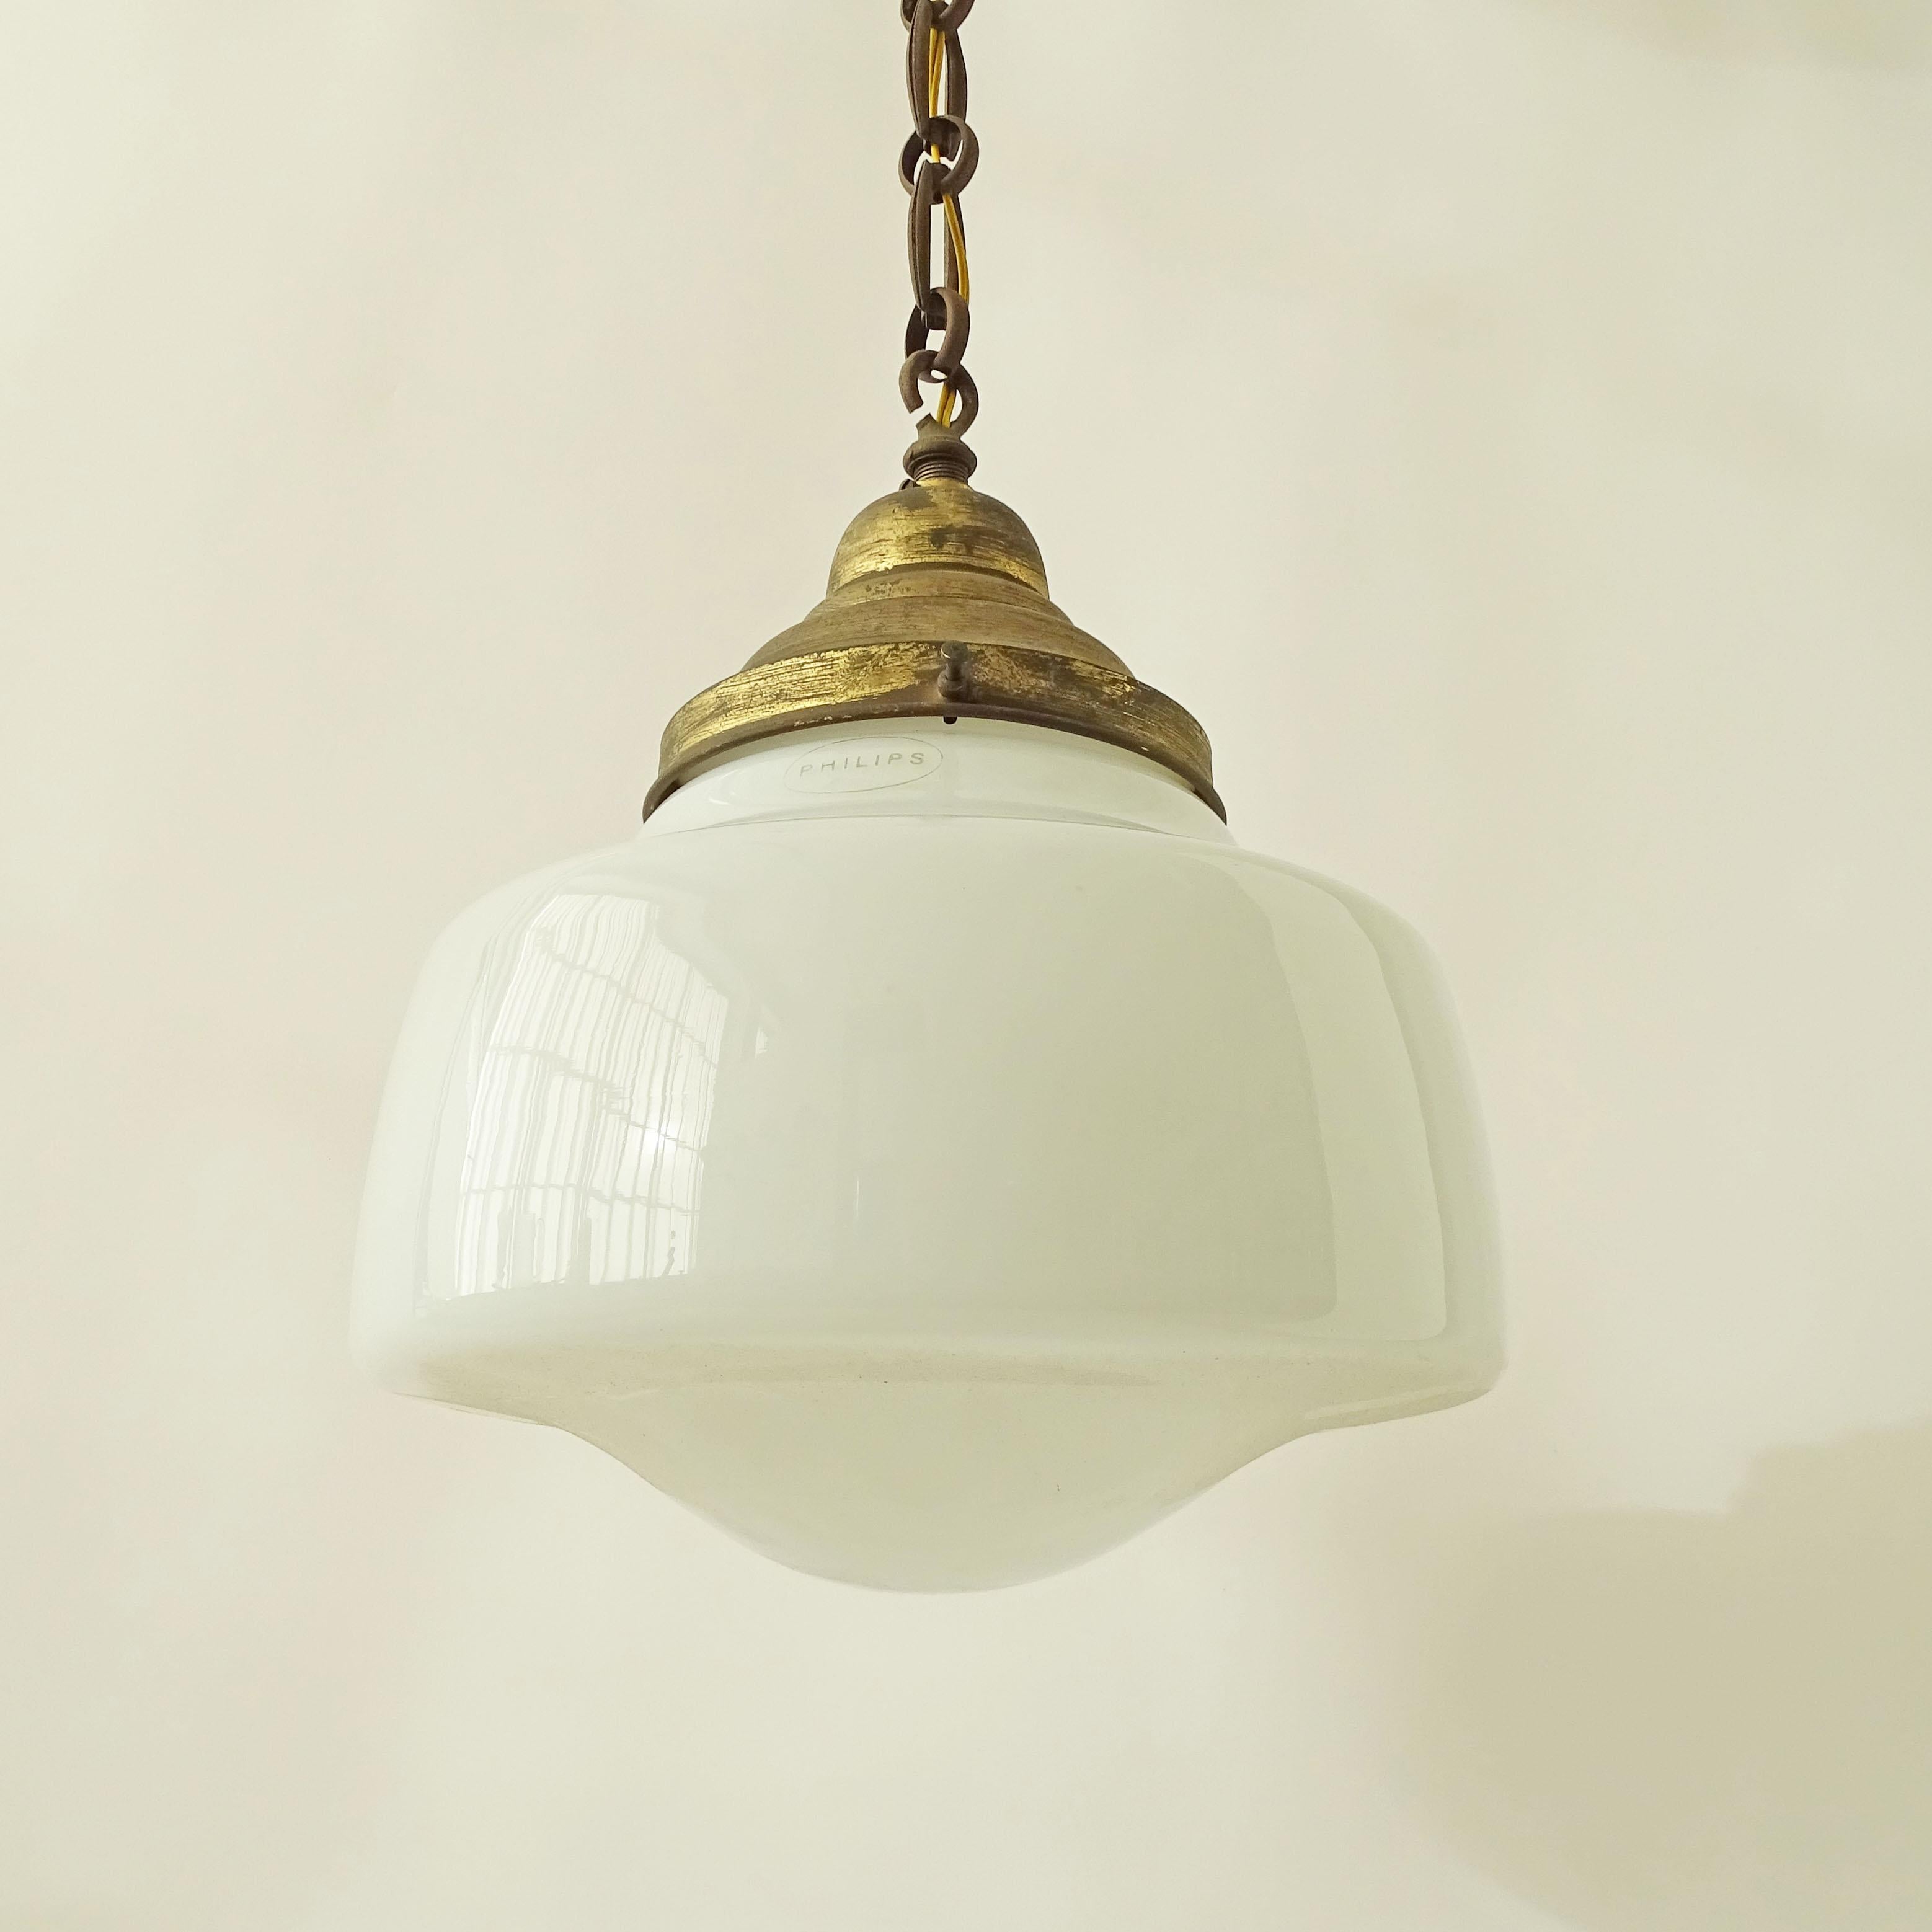 1930s Philips opaline glass and brass pendant.
These examples were used very often in Italian 1920s / 30s interiors.